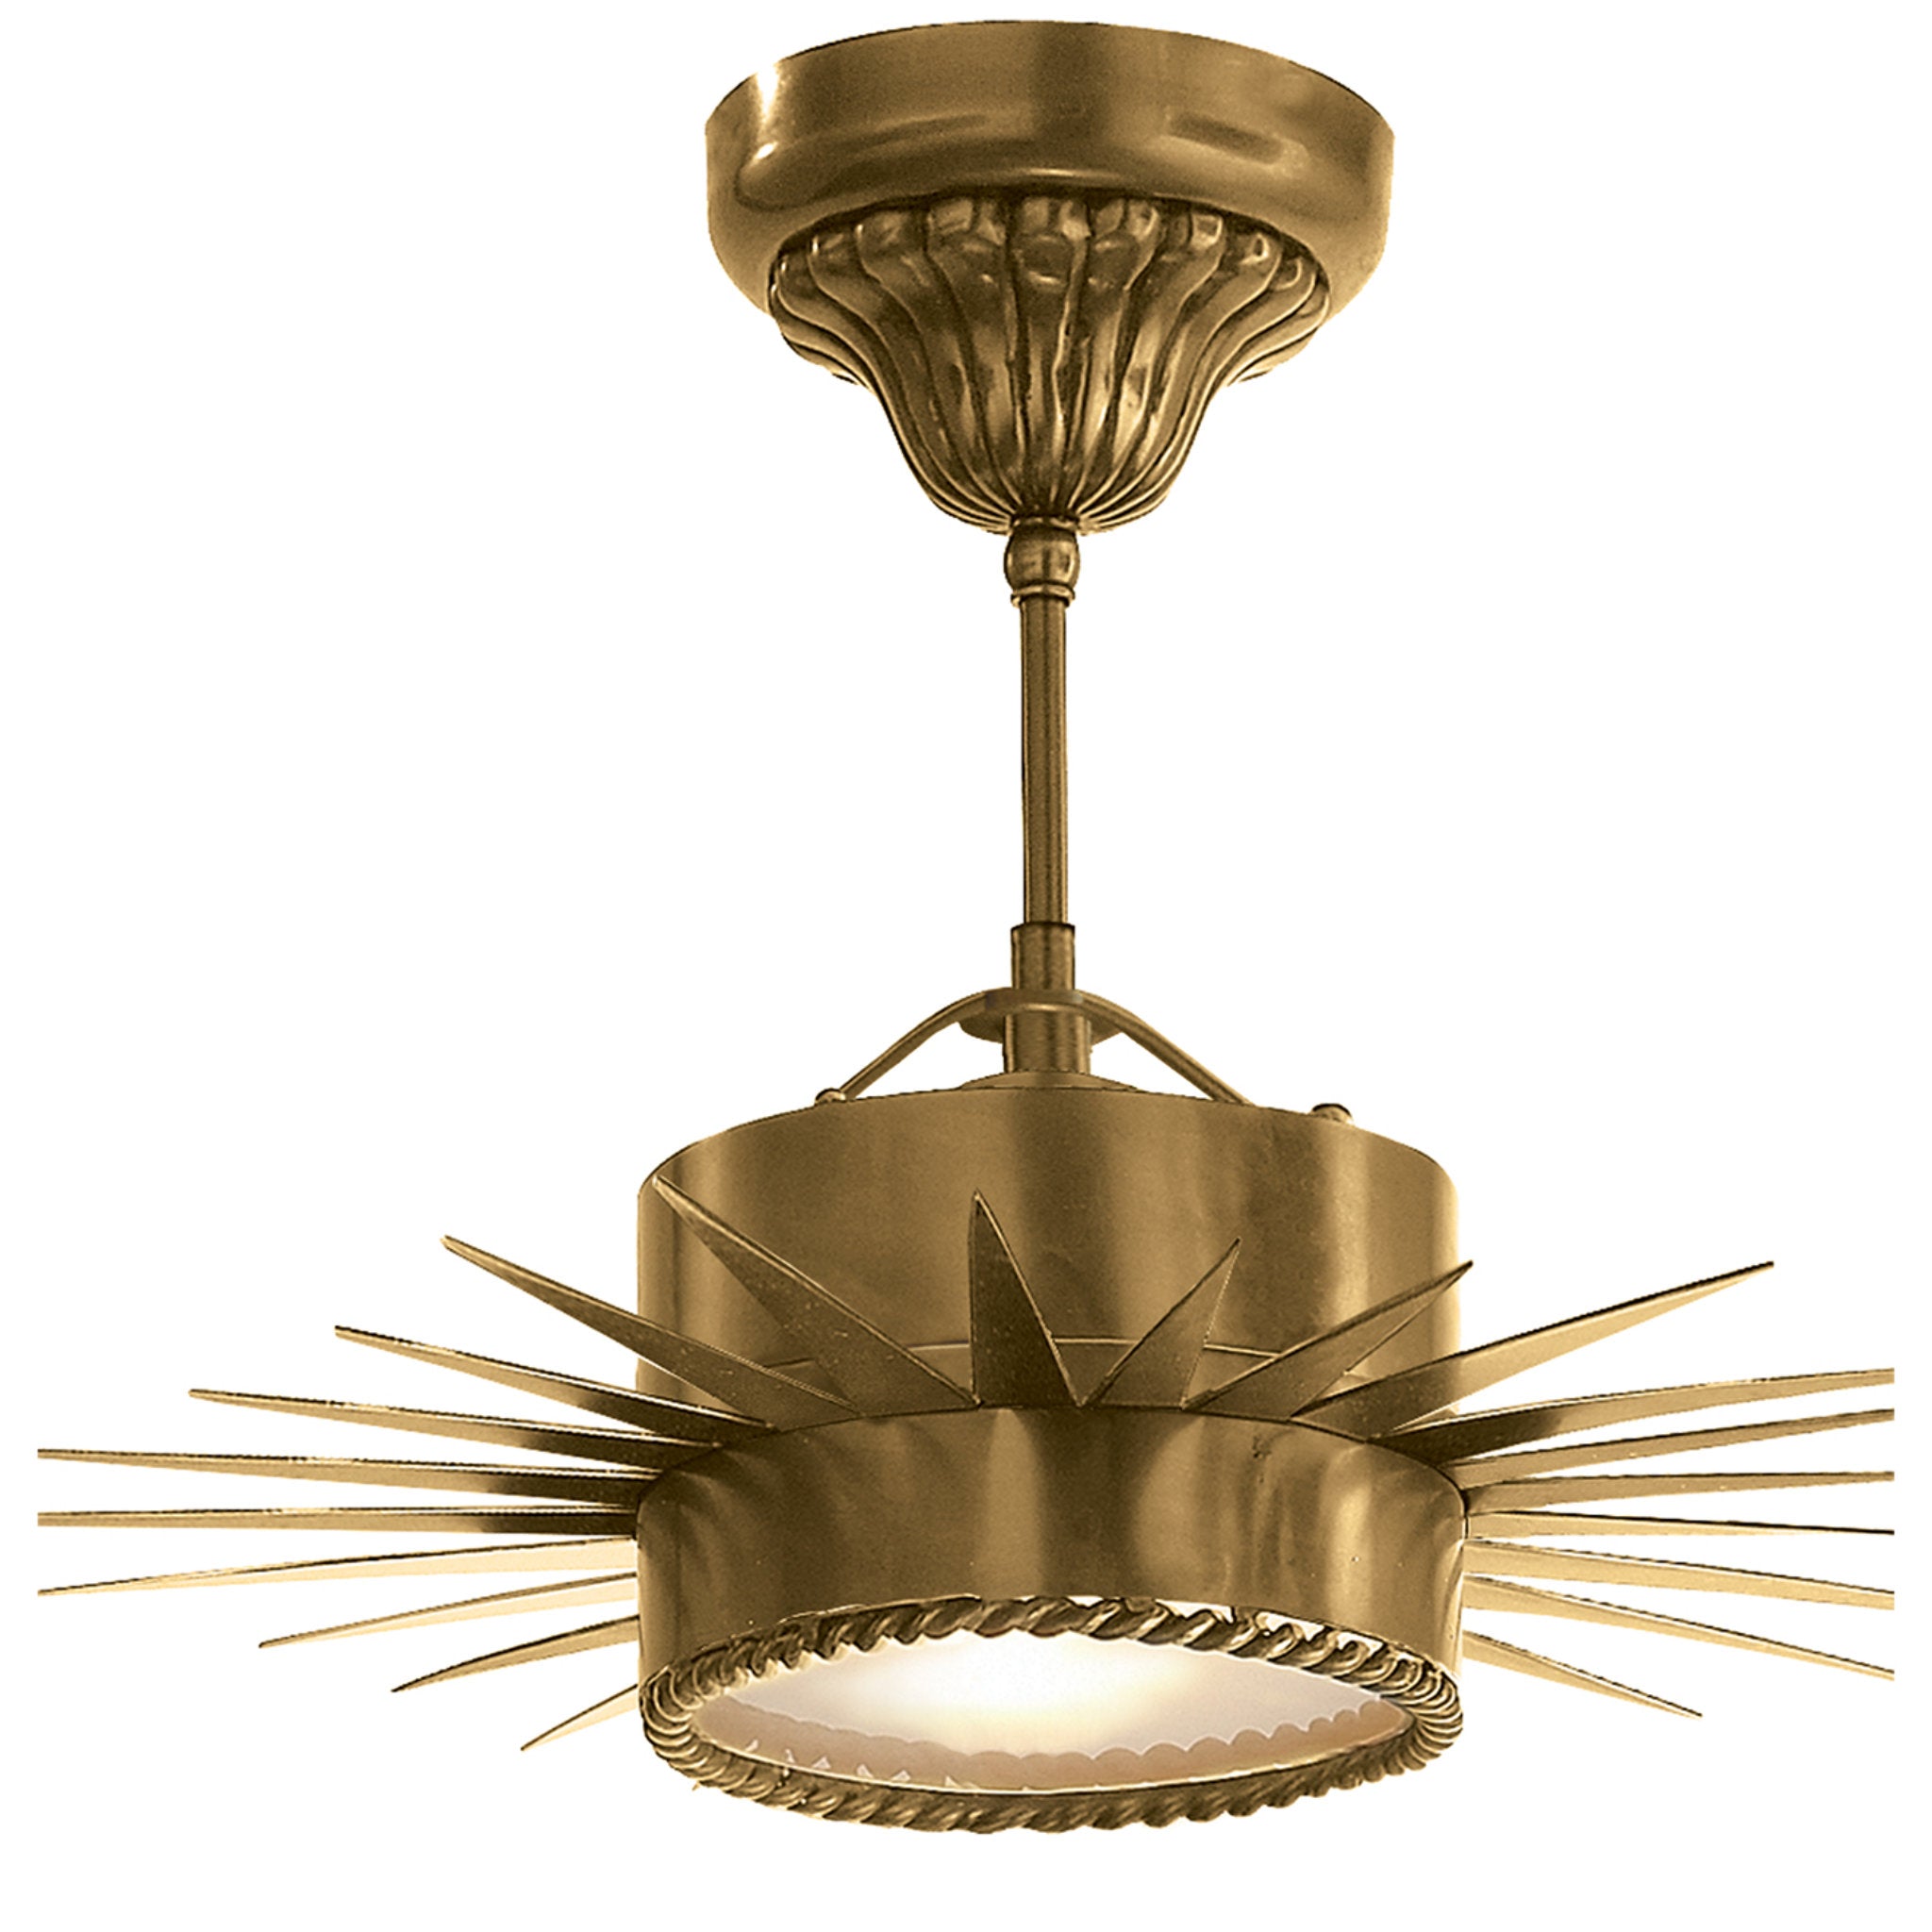 Suzanne Kasler Soleil Small Semi-Flush in Hand-Rubbed Antique Brass with Frosted Glass